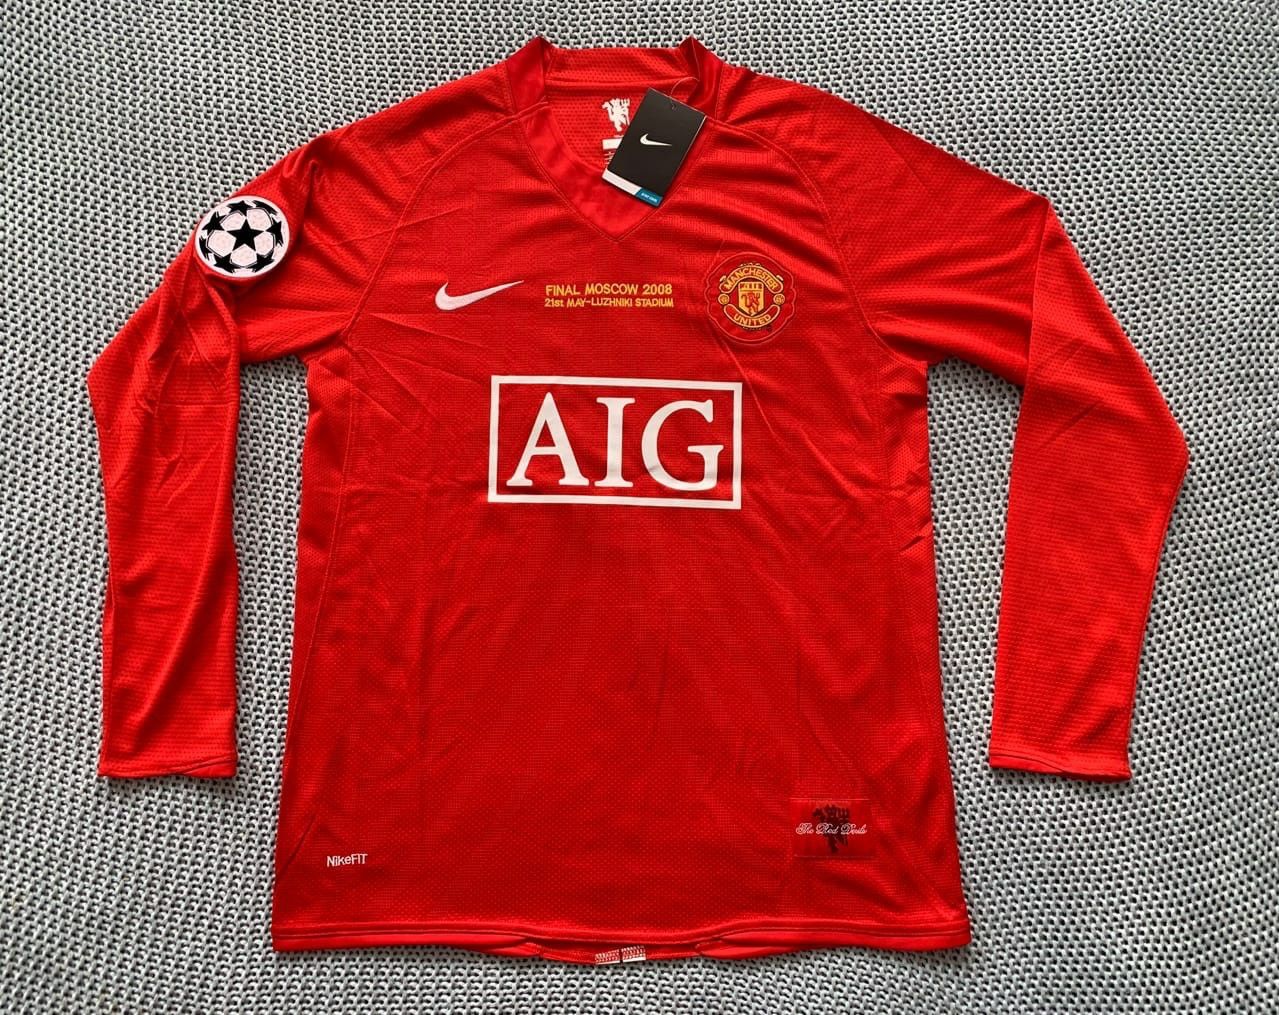 Cristiano Ronaldo #7 Manchester United - Brand New Men's Red Champions League Final 2008 Retro Vintage Long Sleeve Soccer Jersey - Size M / L / XL